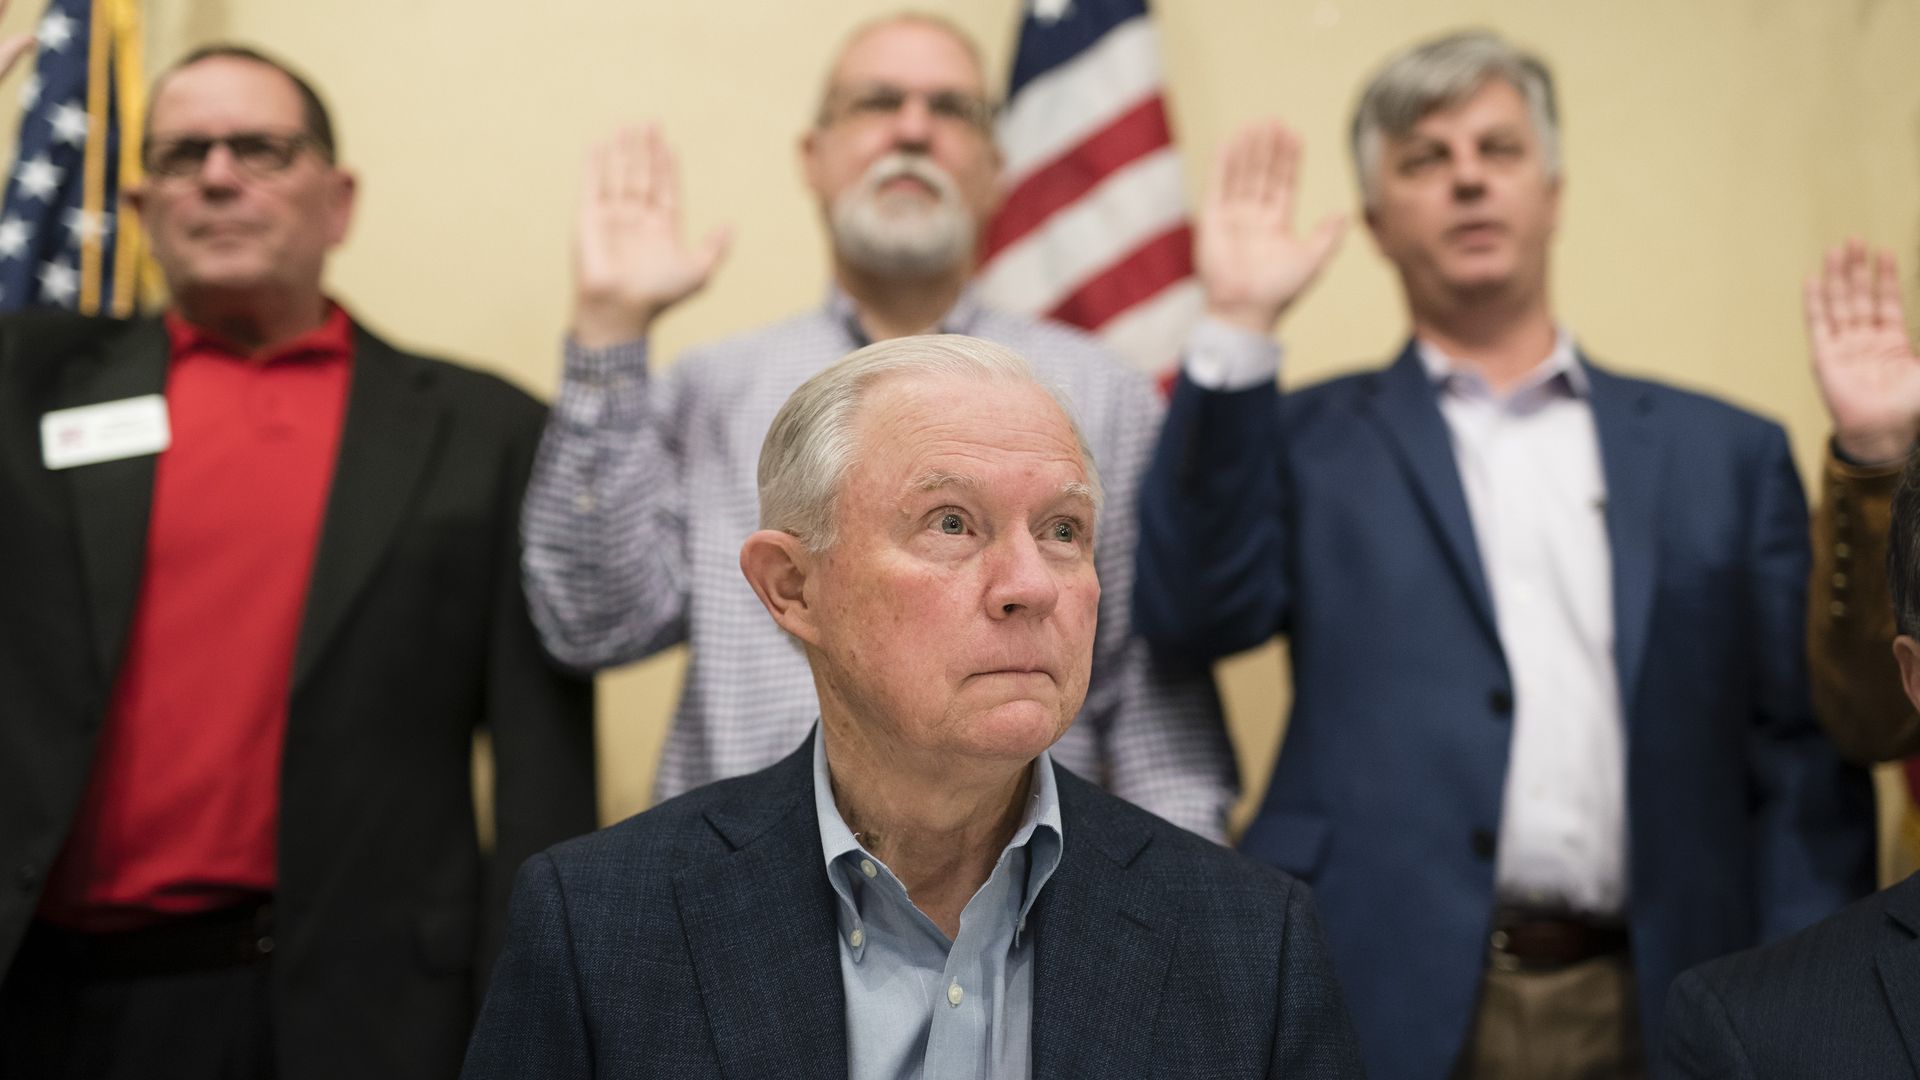  Former Attorney General Jeff Sessions is seen during a meeting of local Republicans at the Vestavia Hills Public Library on Saturday, January 11, 2020 in Vestavia Hills, AL.